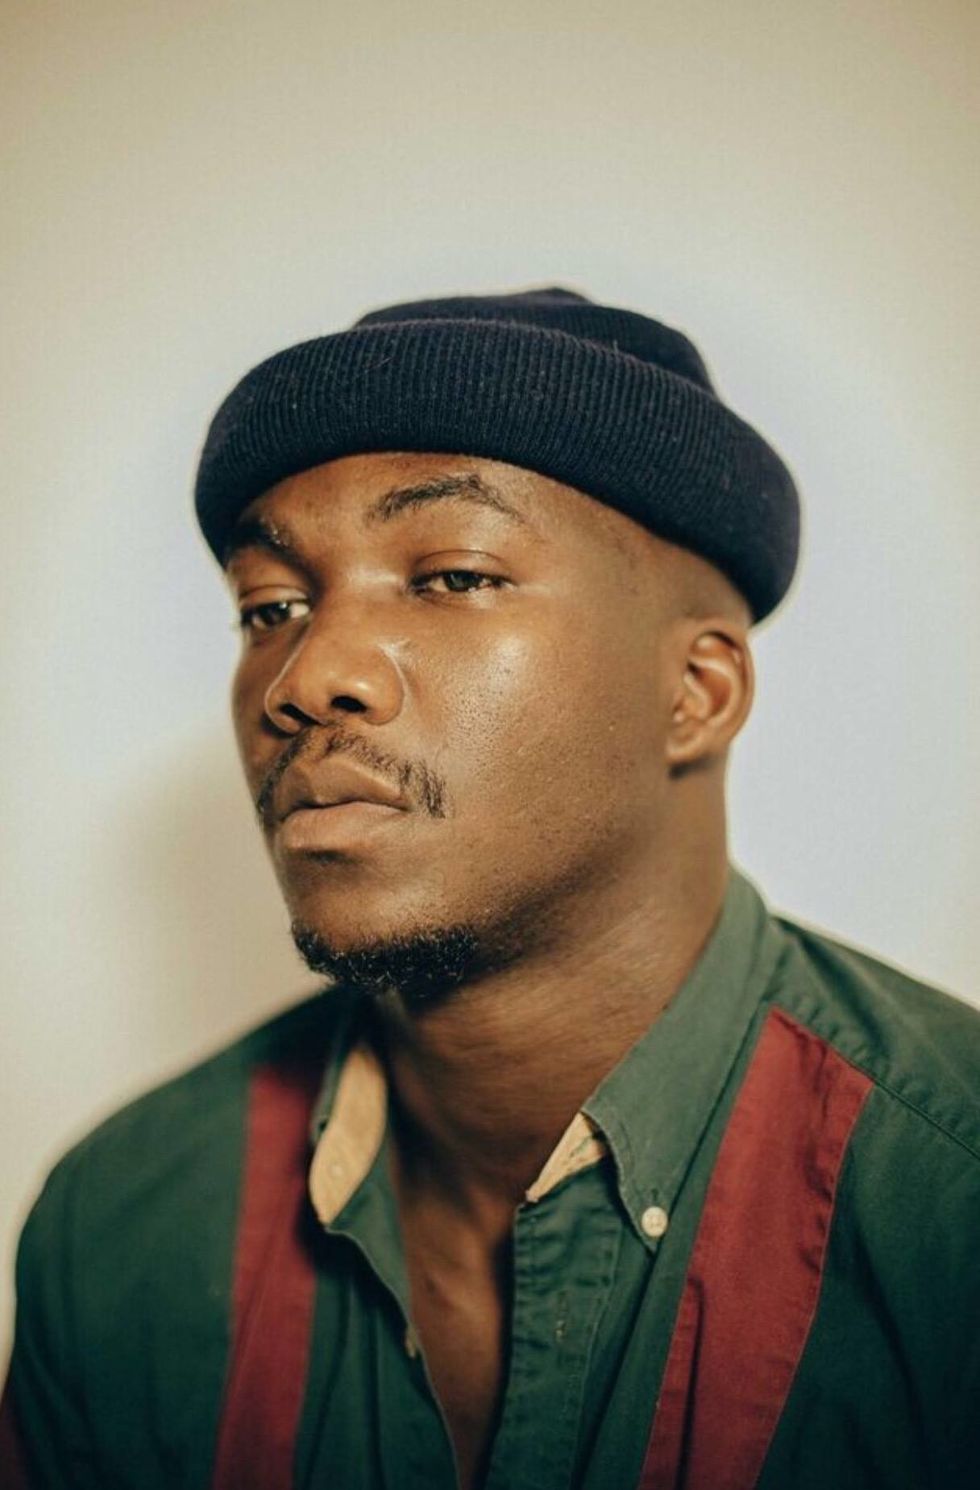 You Should Be Listening to Jacob Banks' Powerful Songs